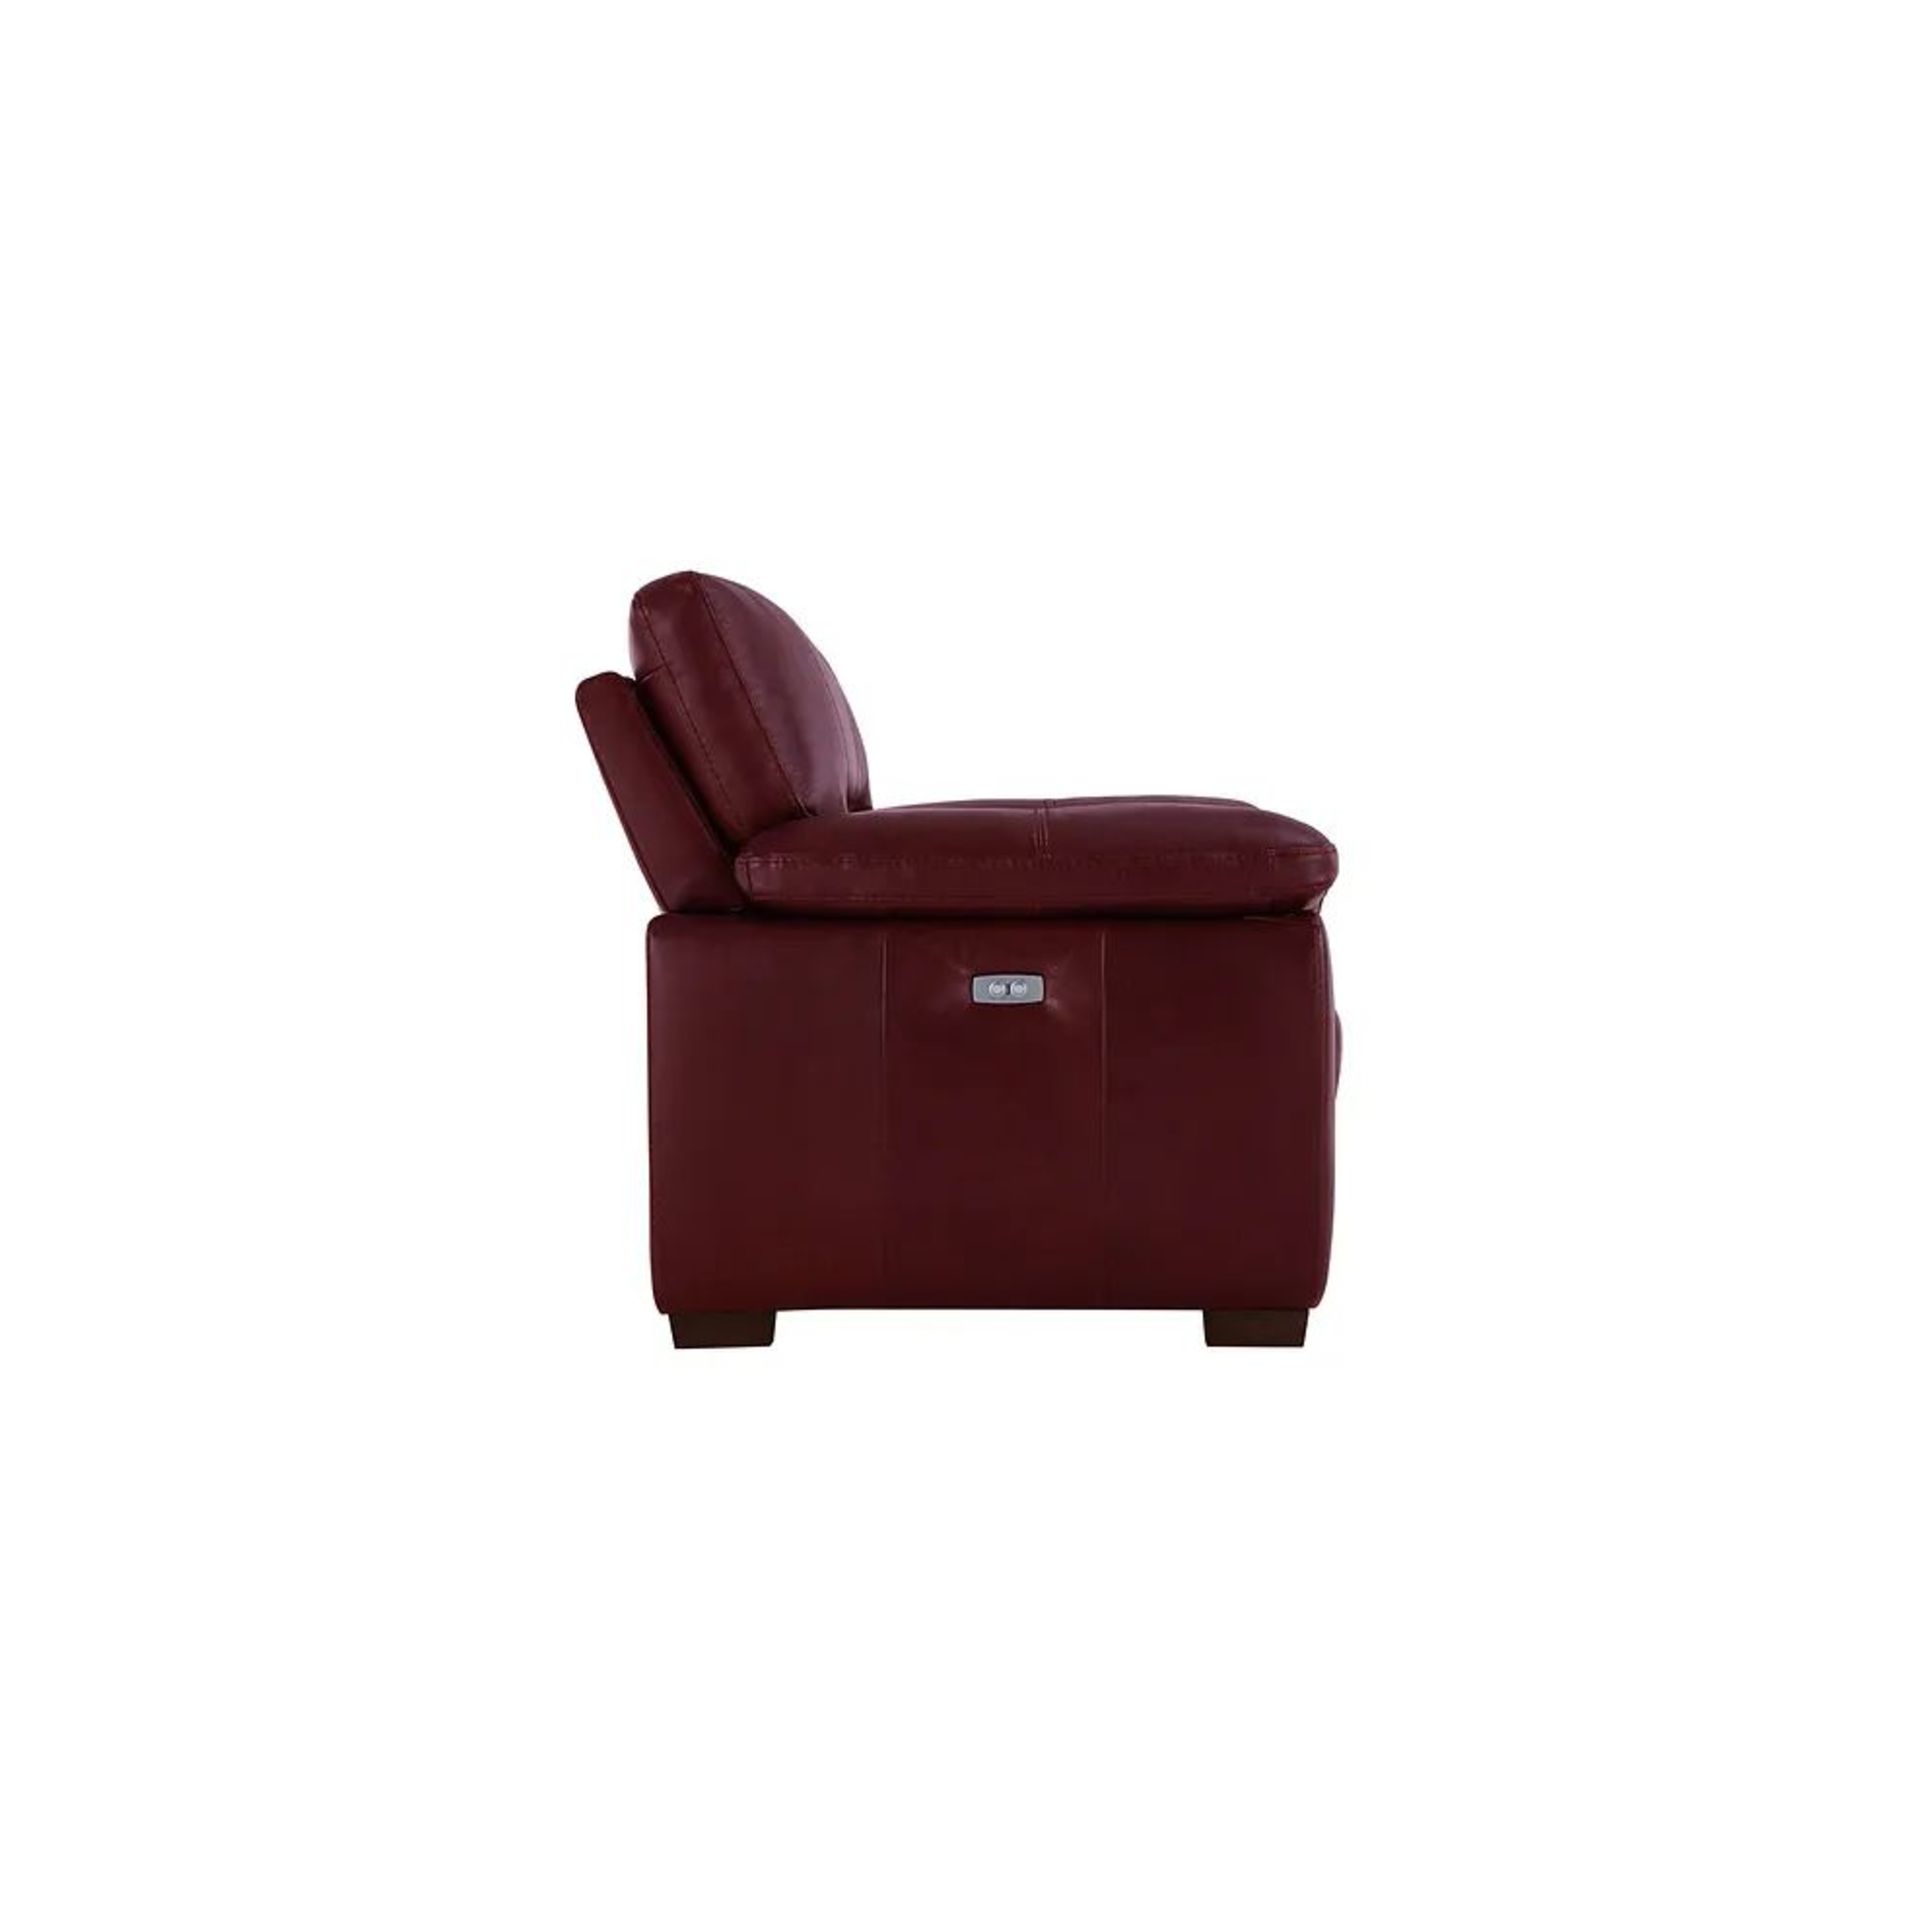 BRAND NEW ARLINGTON Electric Recliner Armchair - BURGANDY LEATHER. RRP £1199. Create a traditional - Image 6 of 12